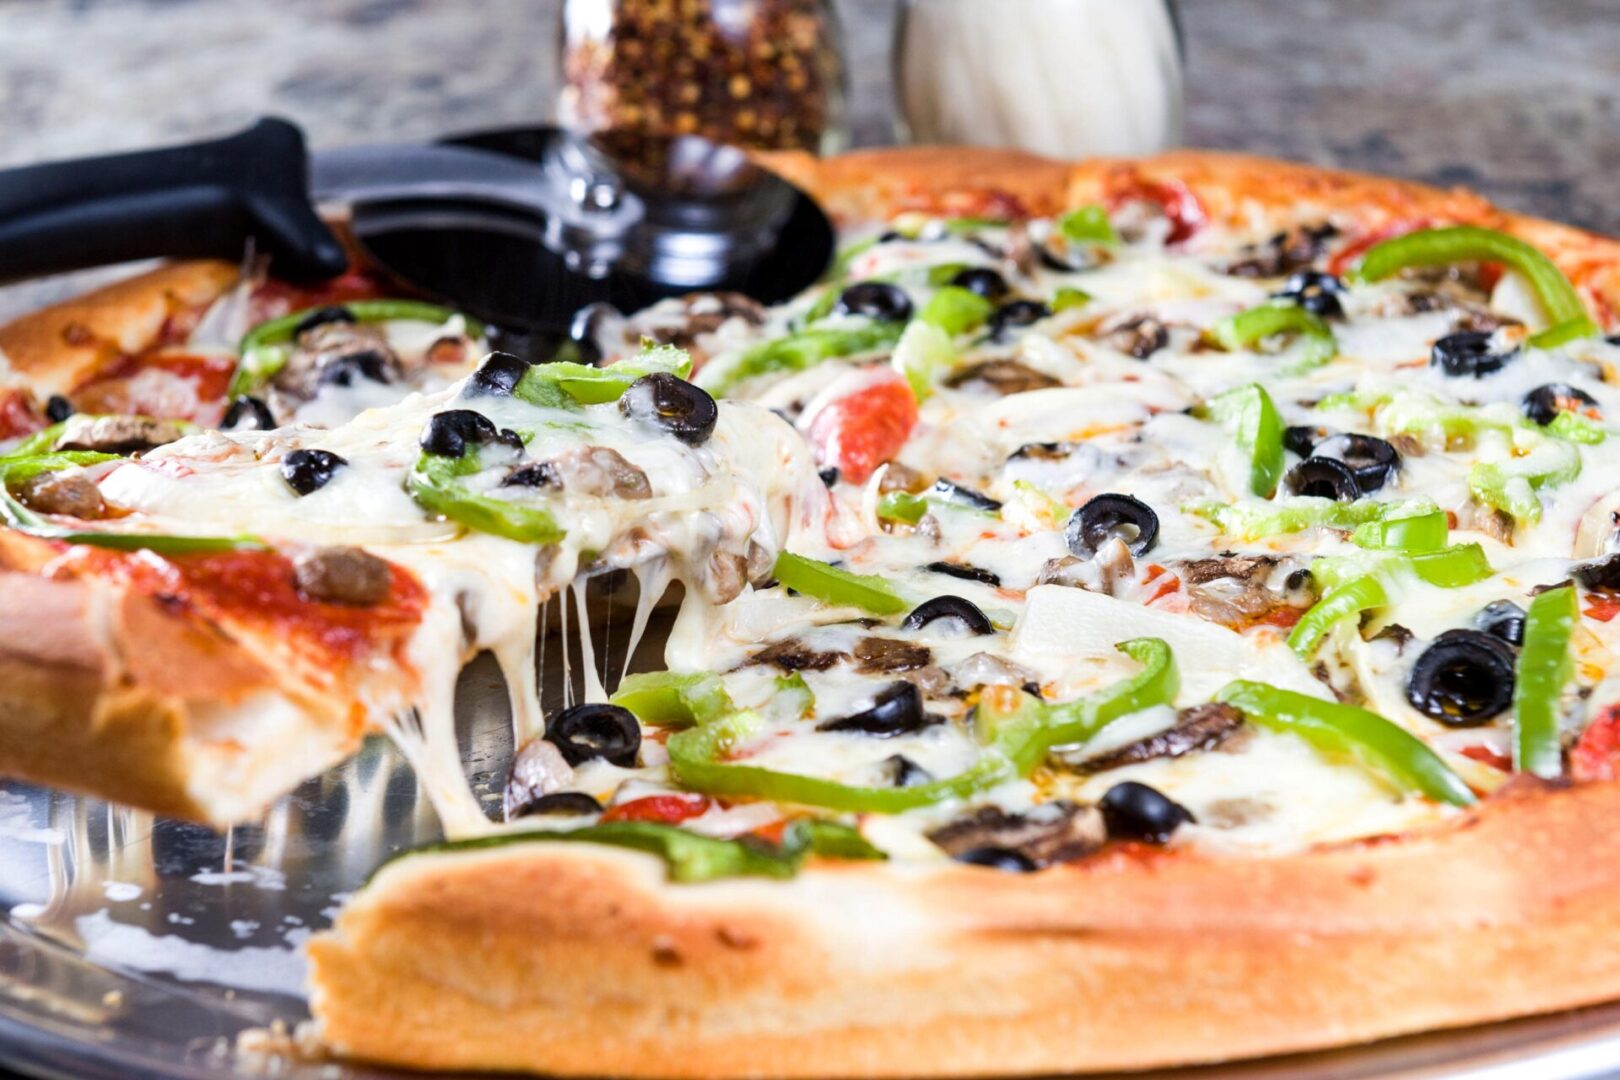 A pizza with olives, mushrooms and peppers on it.